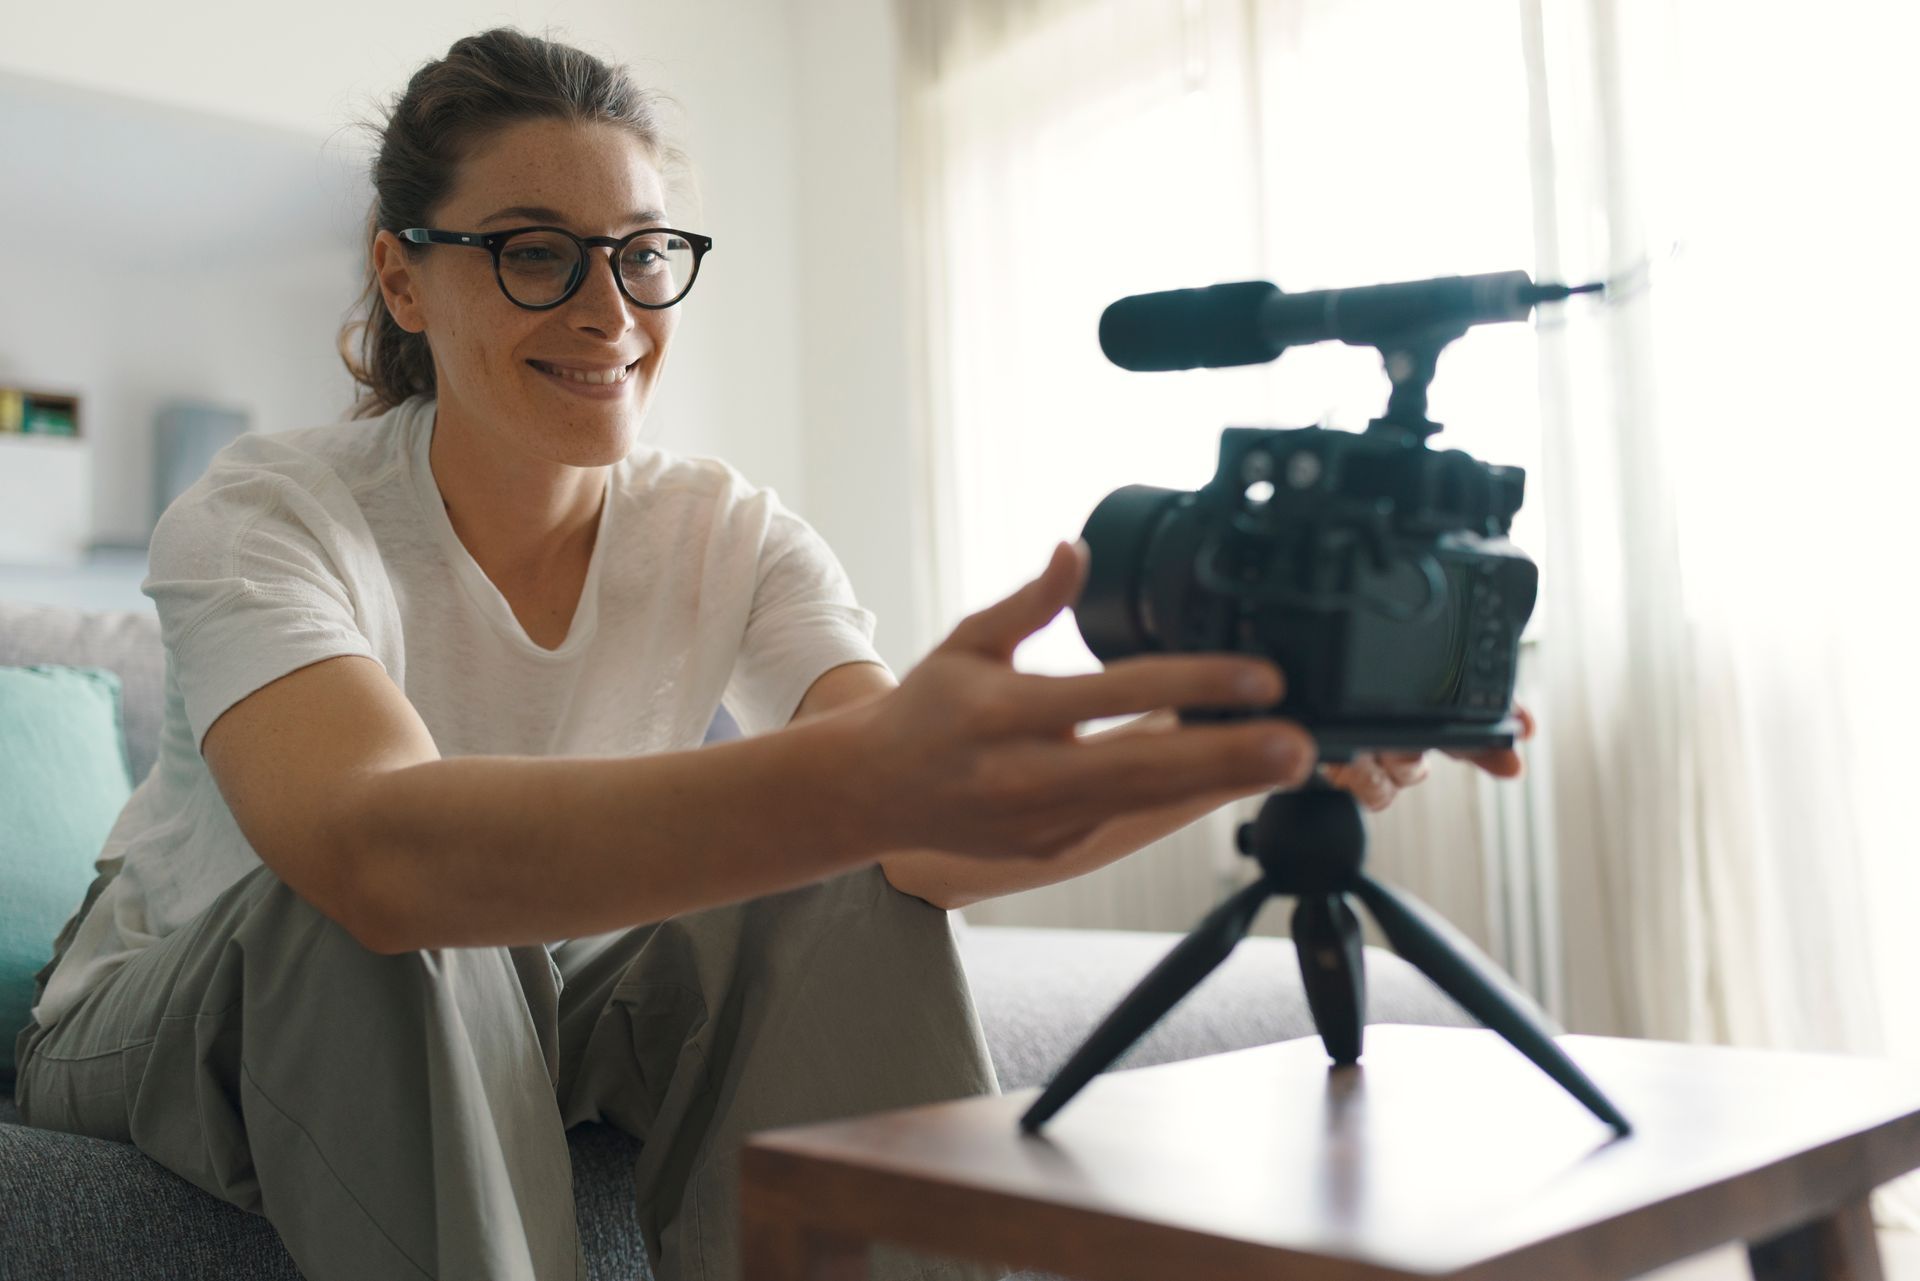 A woman is sitting on a couch holding a camera on a tripod.